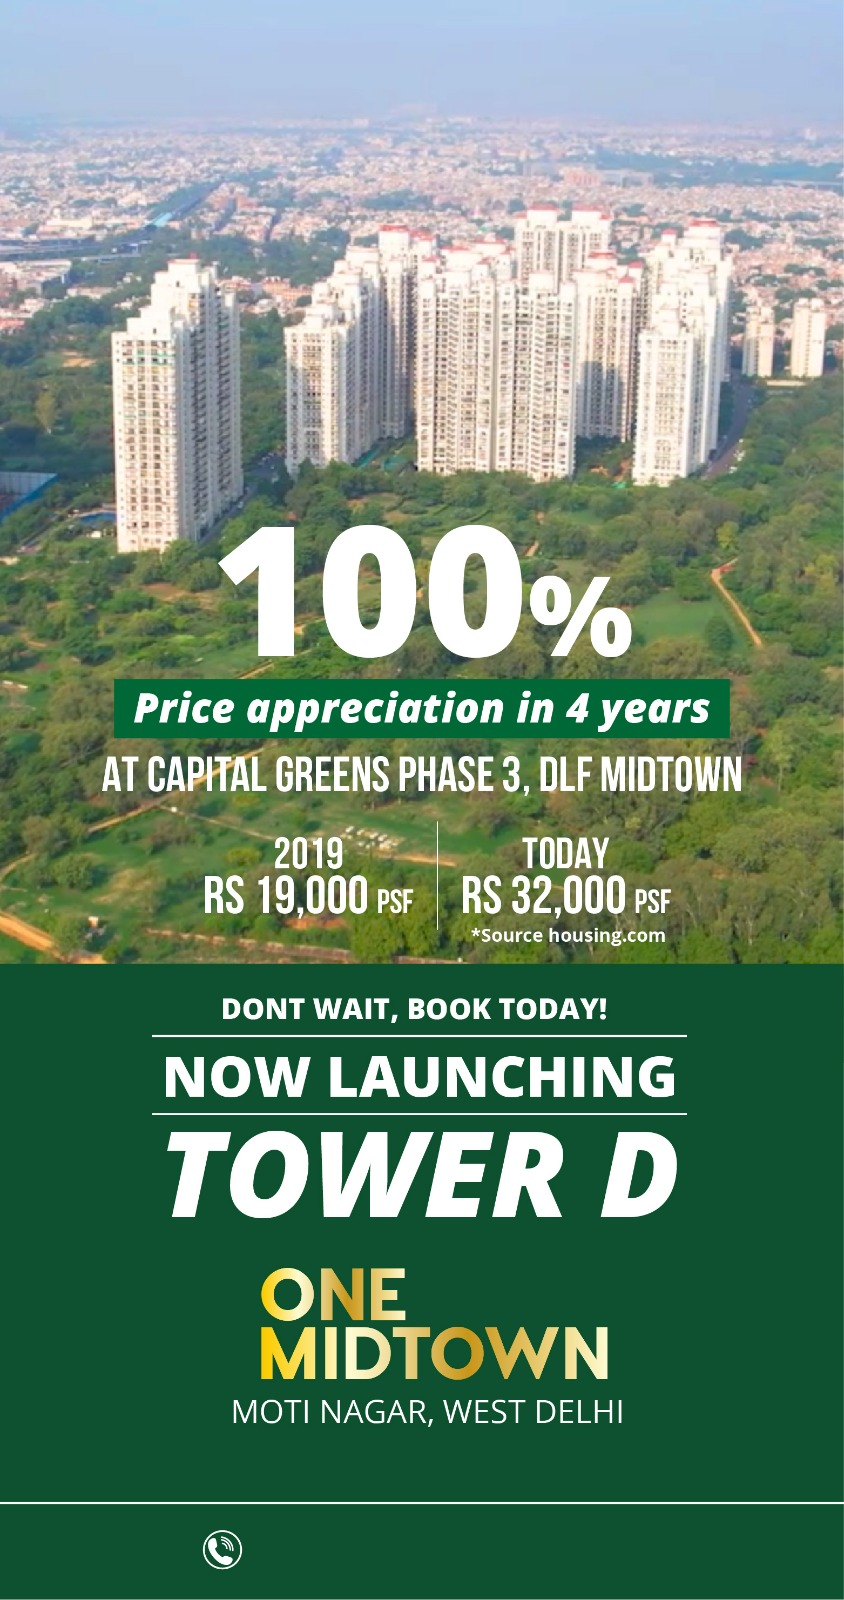 DLF launches luxury housing project in Delhi, starting price Rs 3